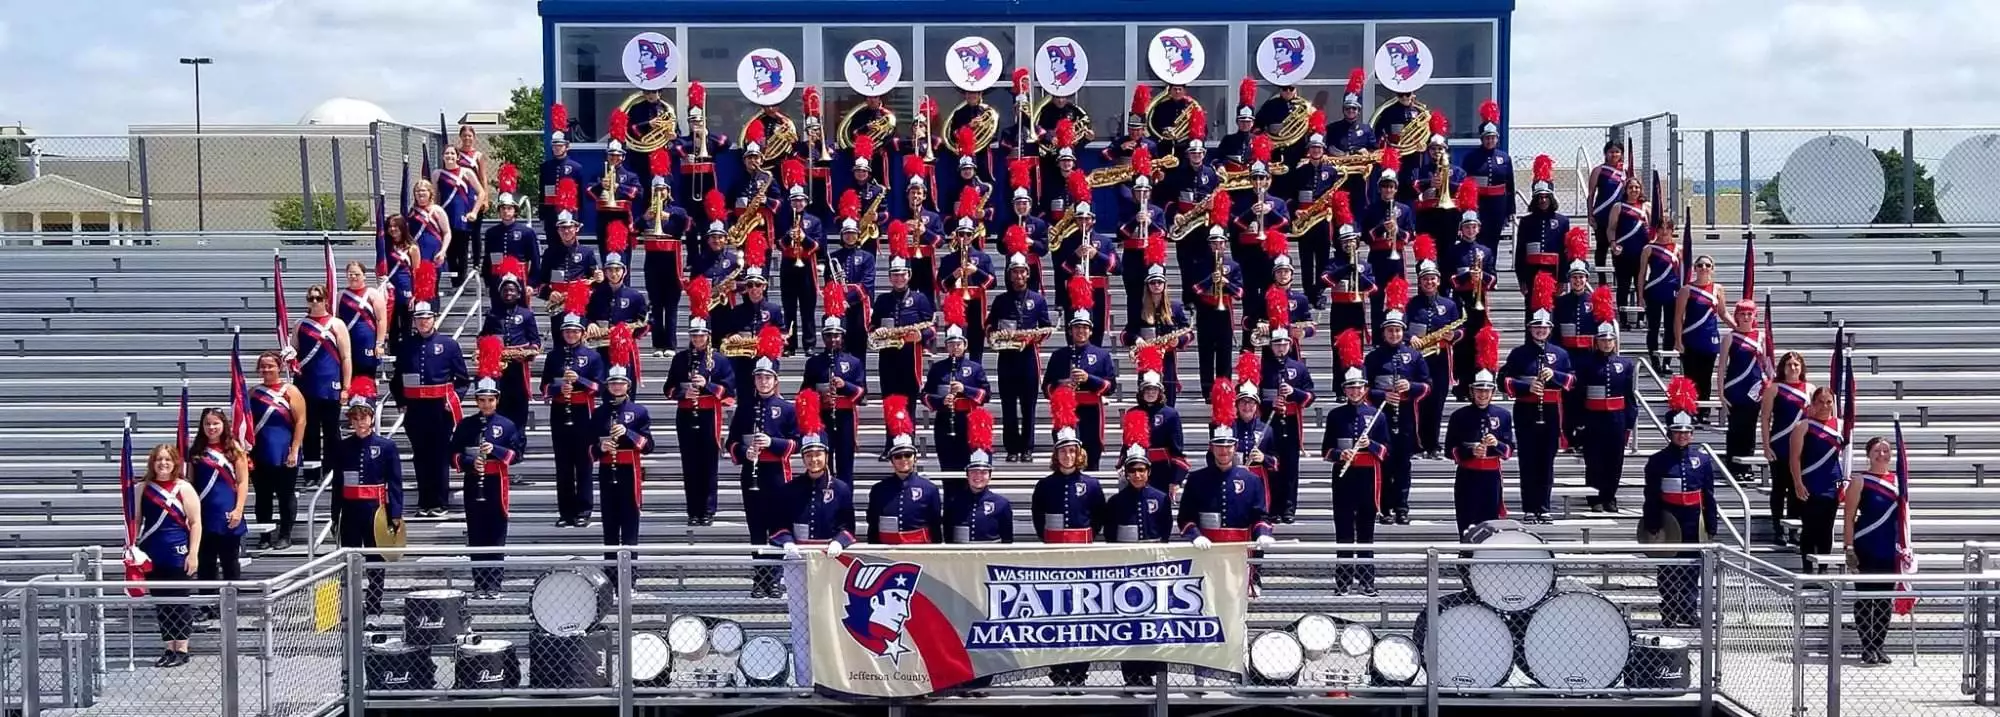 A group of marching band members posing for a picture.